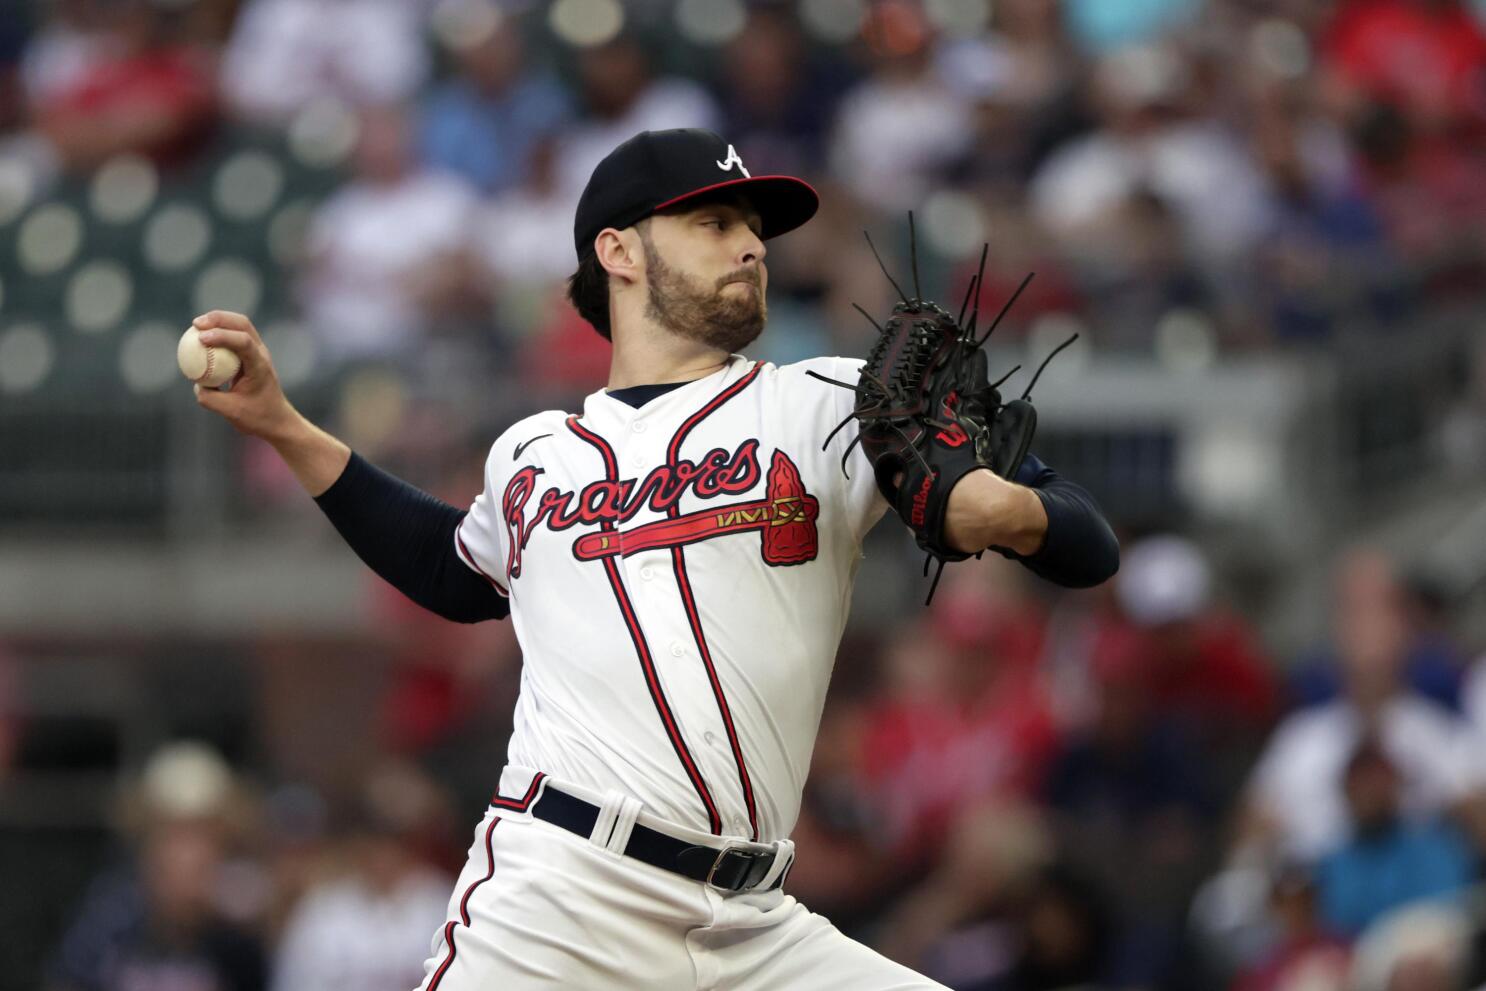 Braves pitcher Ian Anderson sent down to Triple-A